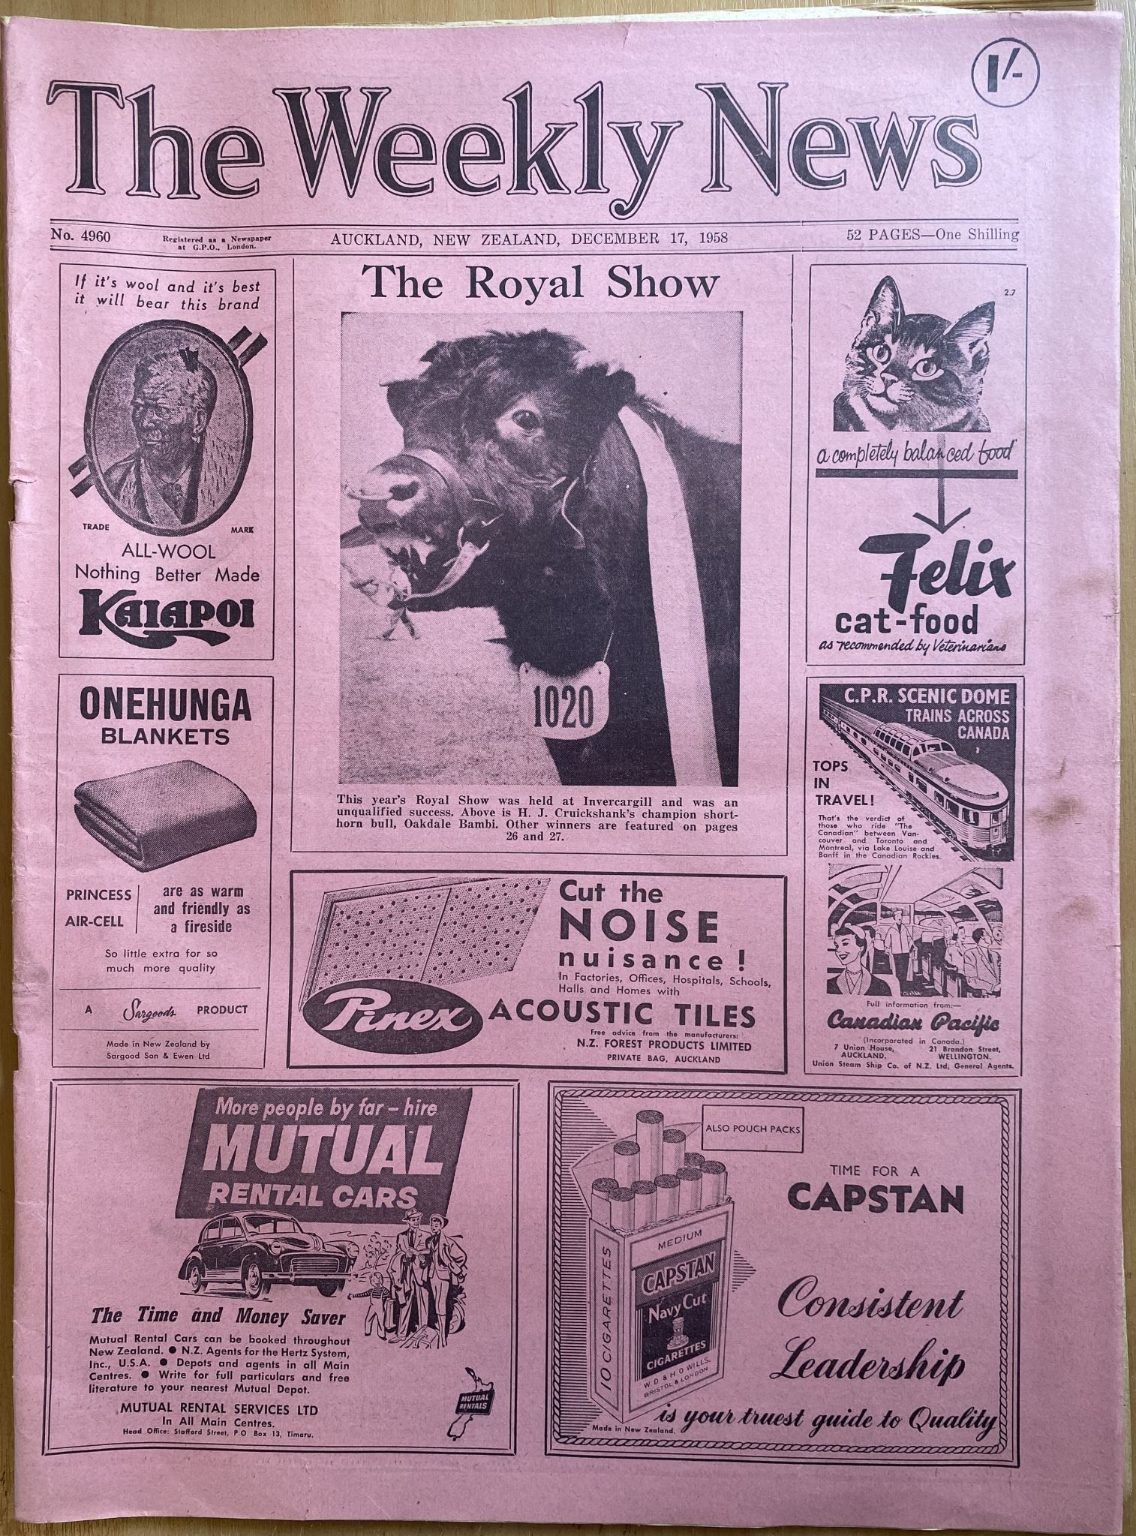 OLD NEWSPAPER: The Weekly News, No. 4960, 17 December 1958